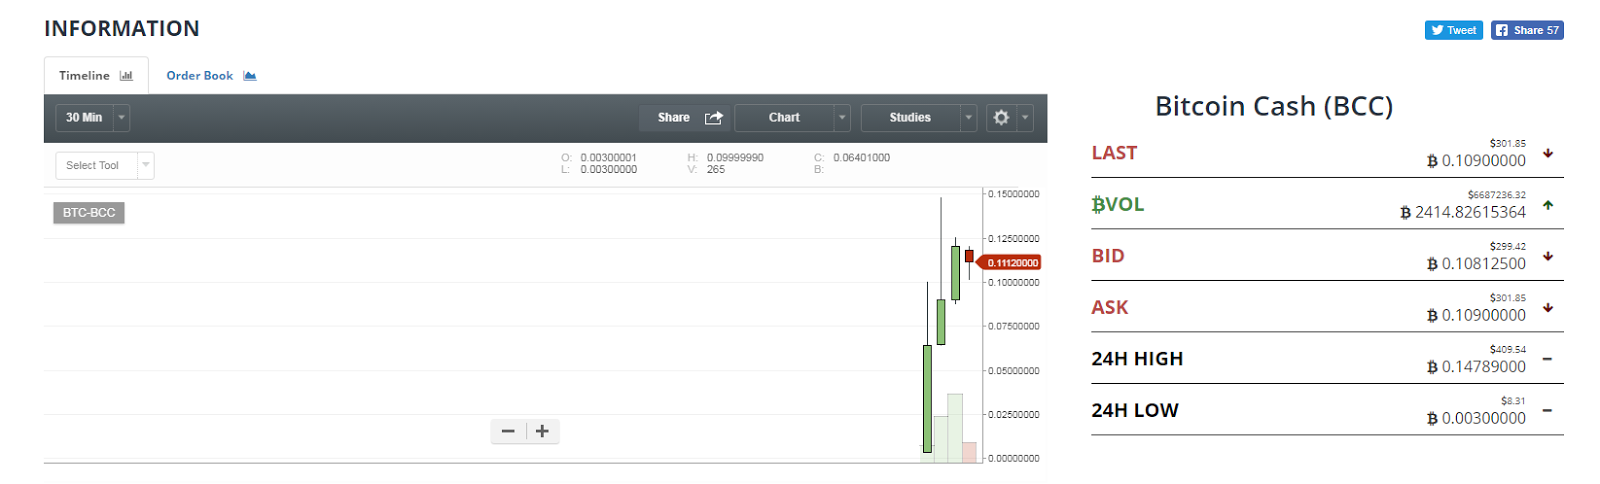 How To Buy Bitcoin With Other Coins On Bittrex Litecoin Difficulty - 